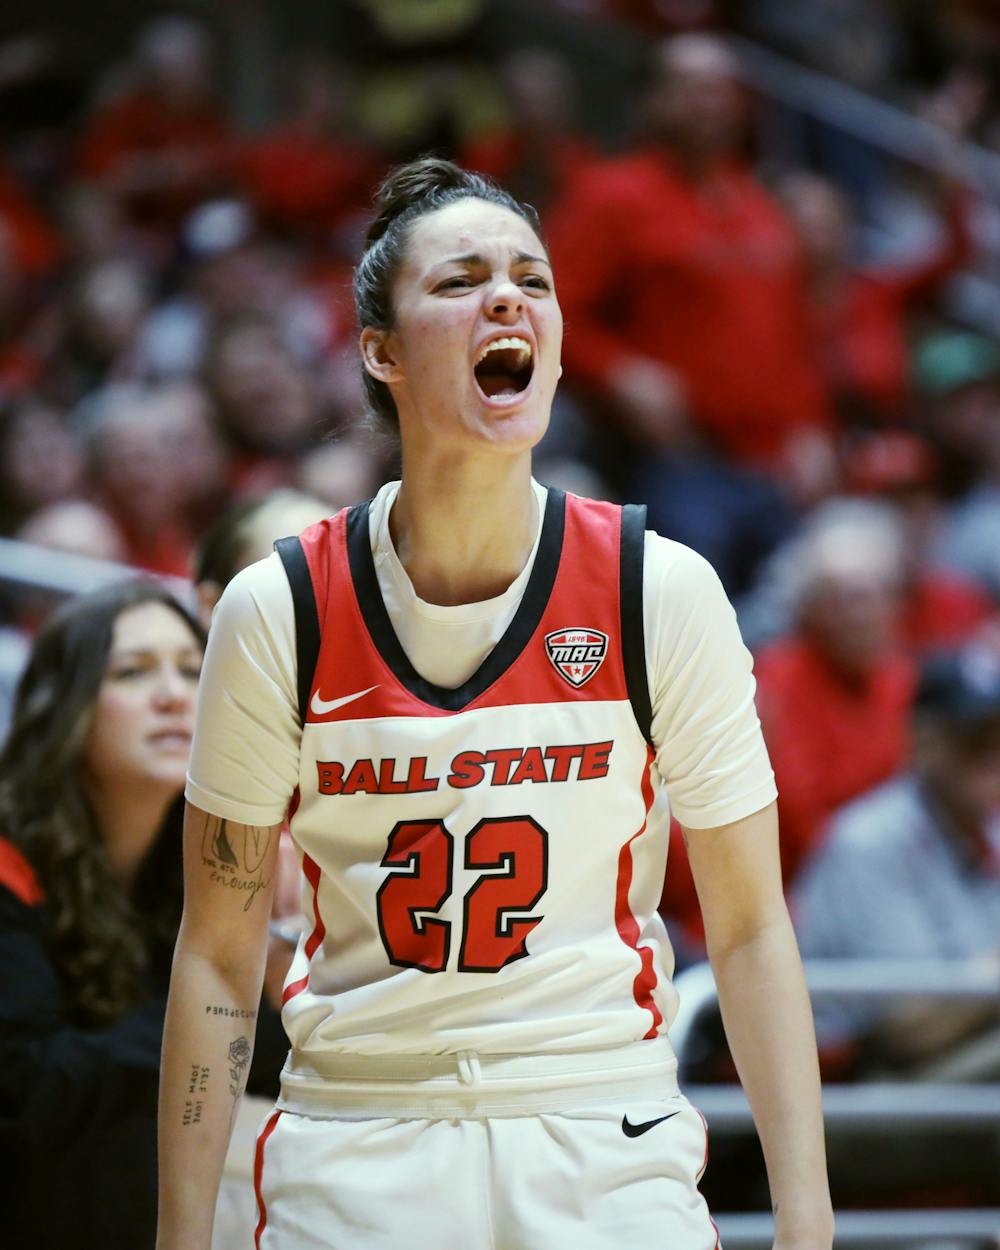 Heading into the 2023 MAC Tournament, Estel Puiggros reflects on her second ACL tear one year later